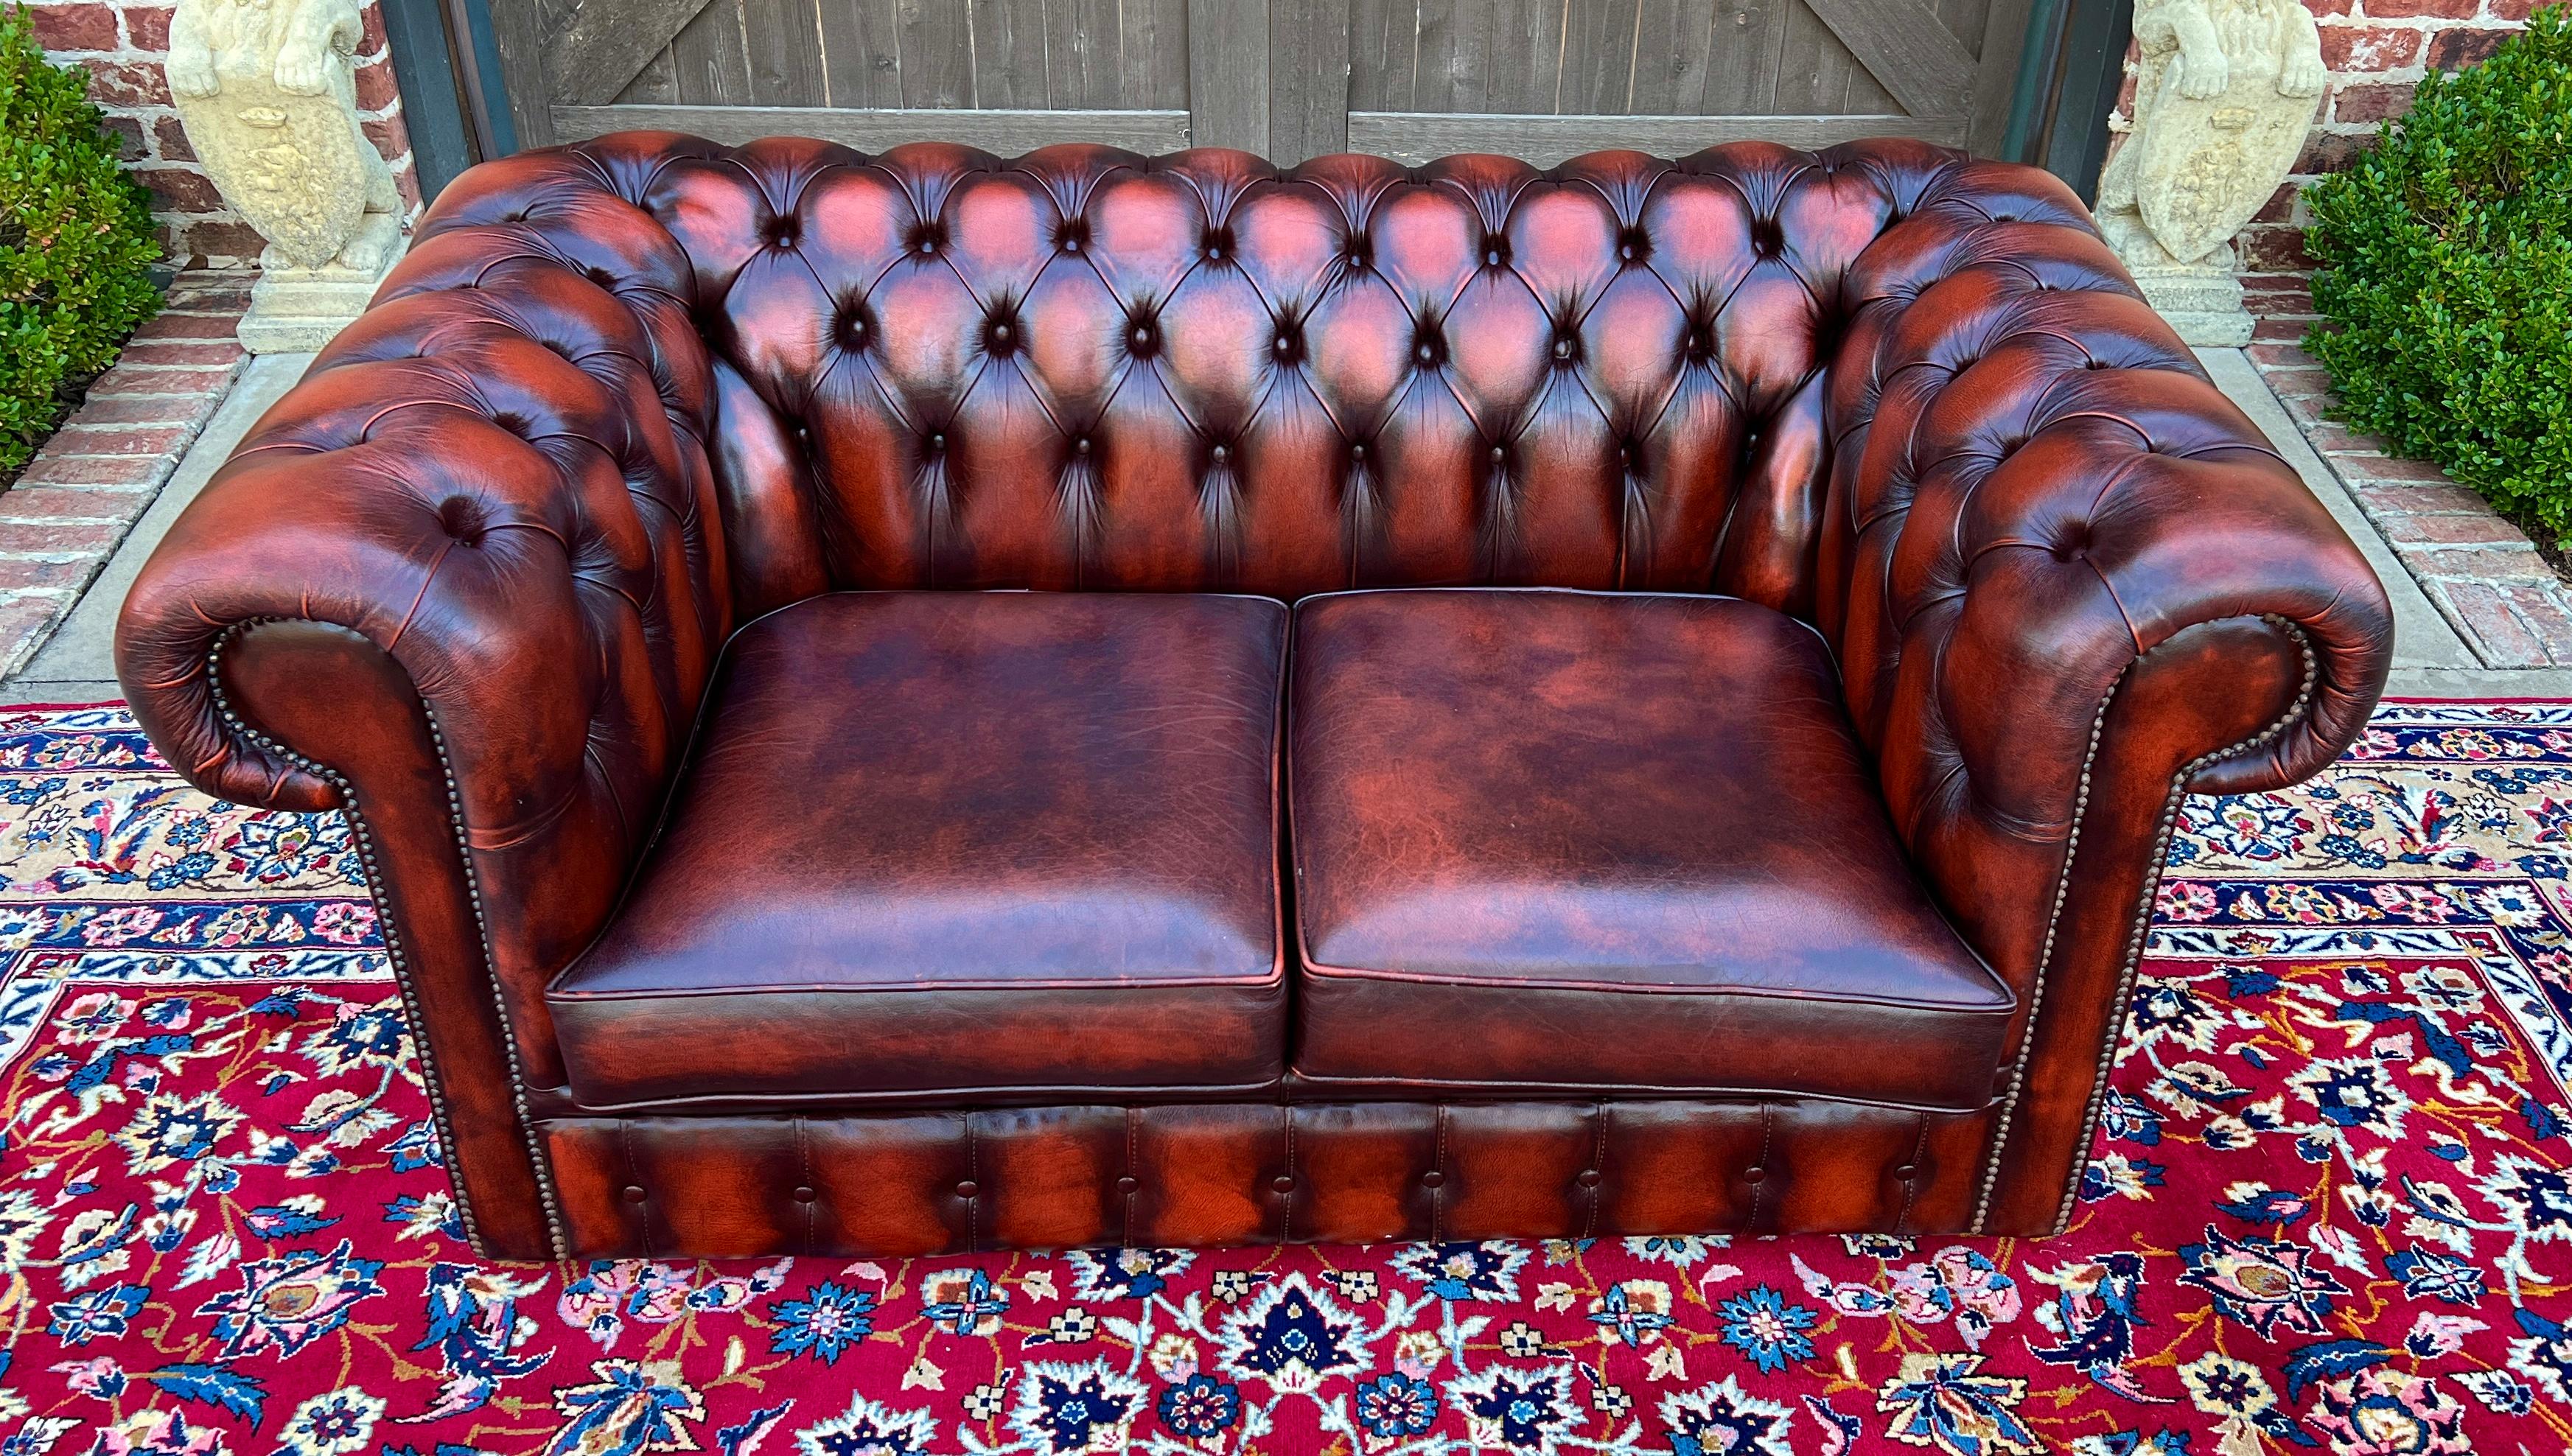 Vintage English Chesterfield Leather Tufted Love Seat Sofa Oxblood Red #1 For Sale 1